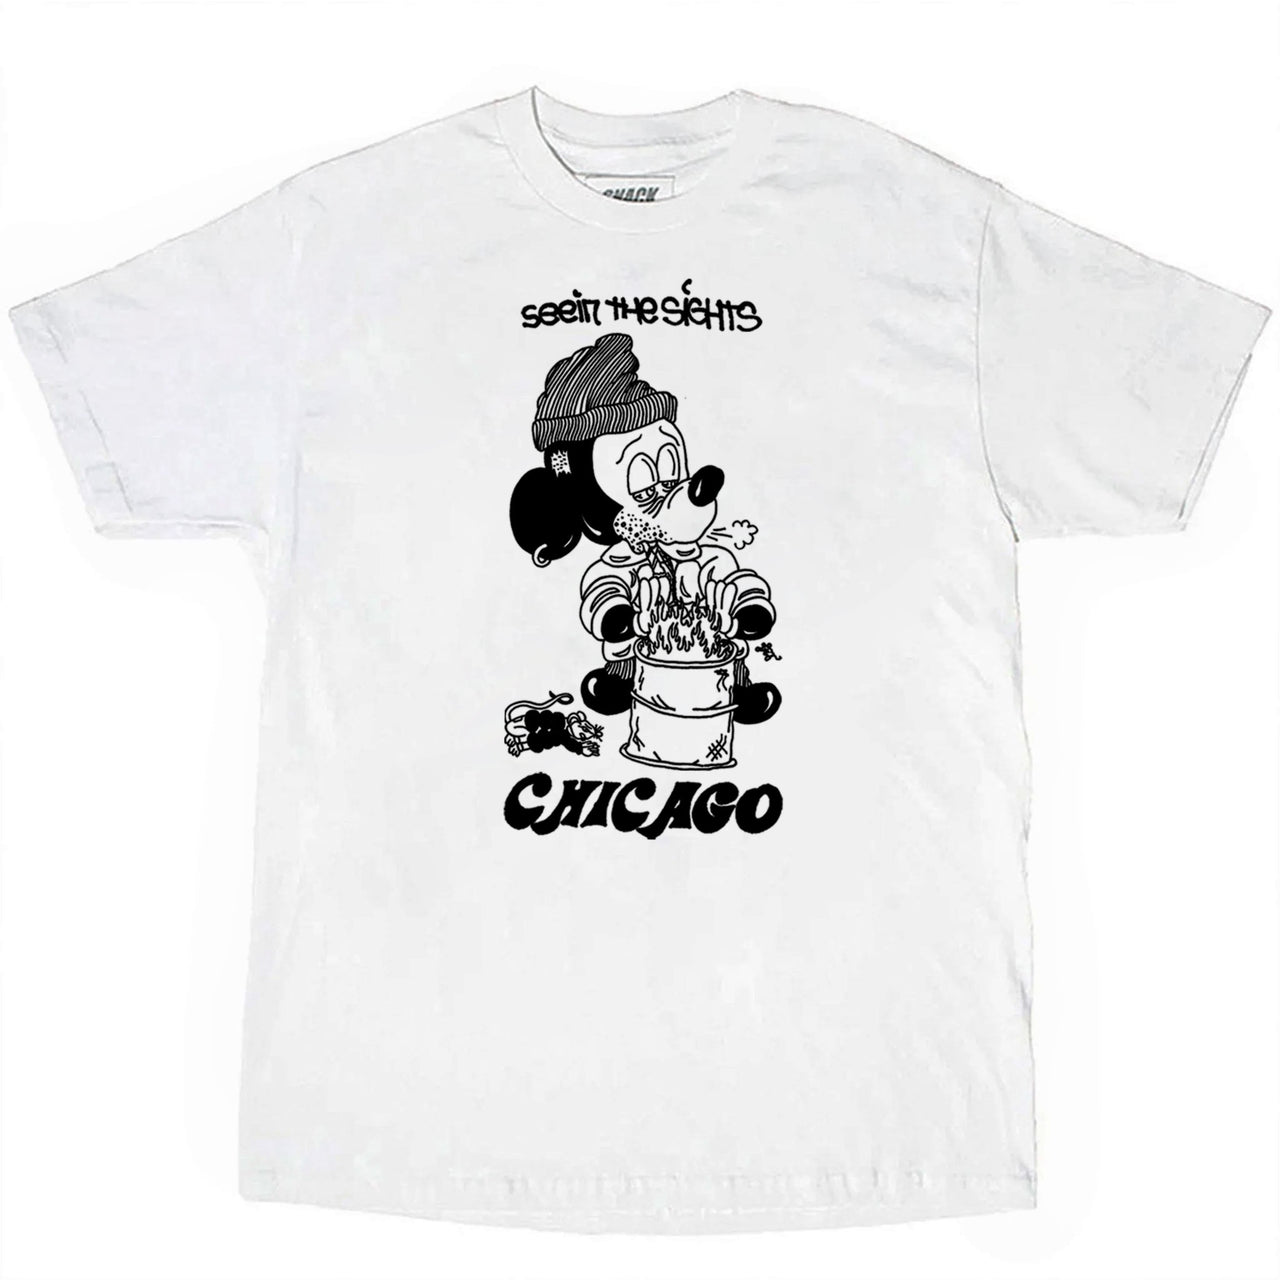 SNACK - SEEIN THE SIGHTS CHICAGO TEE - WHITE / BLACK